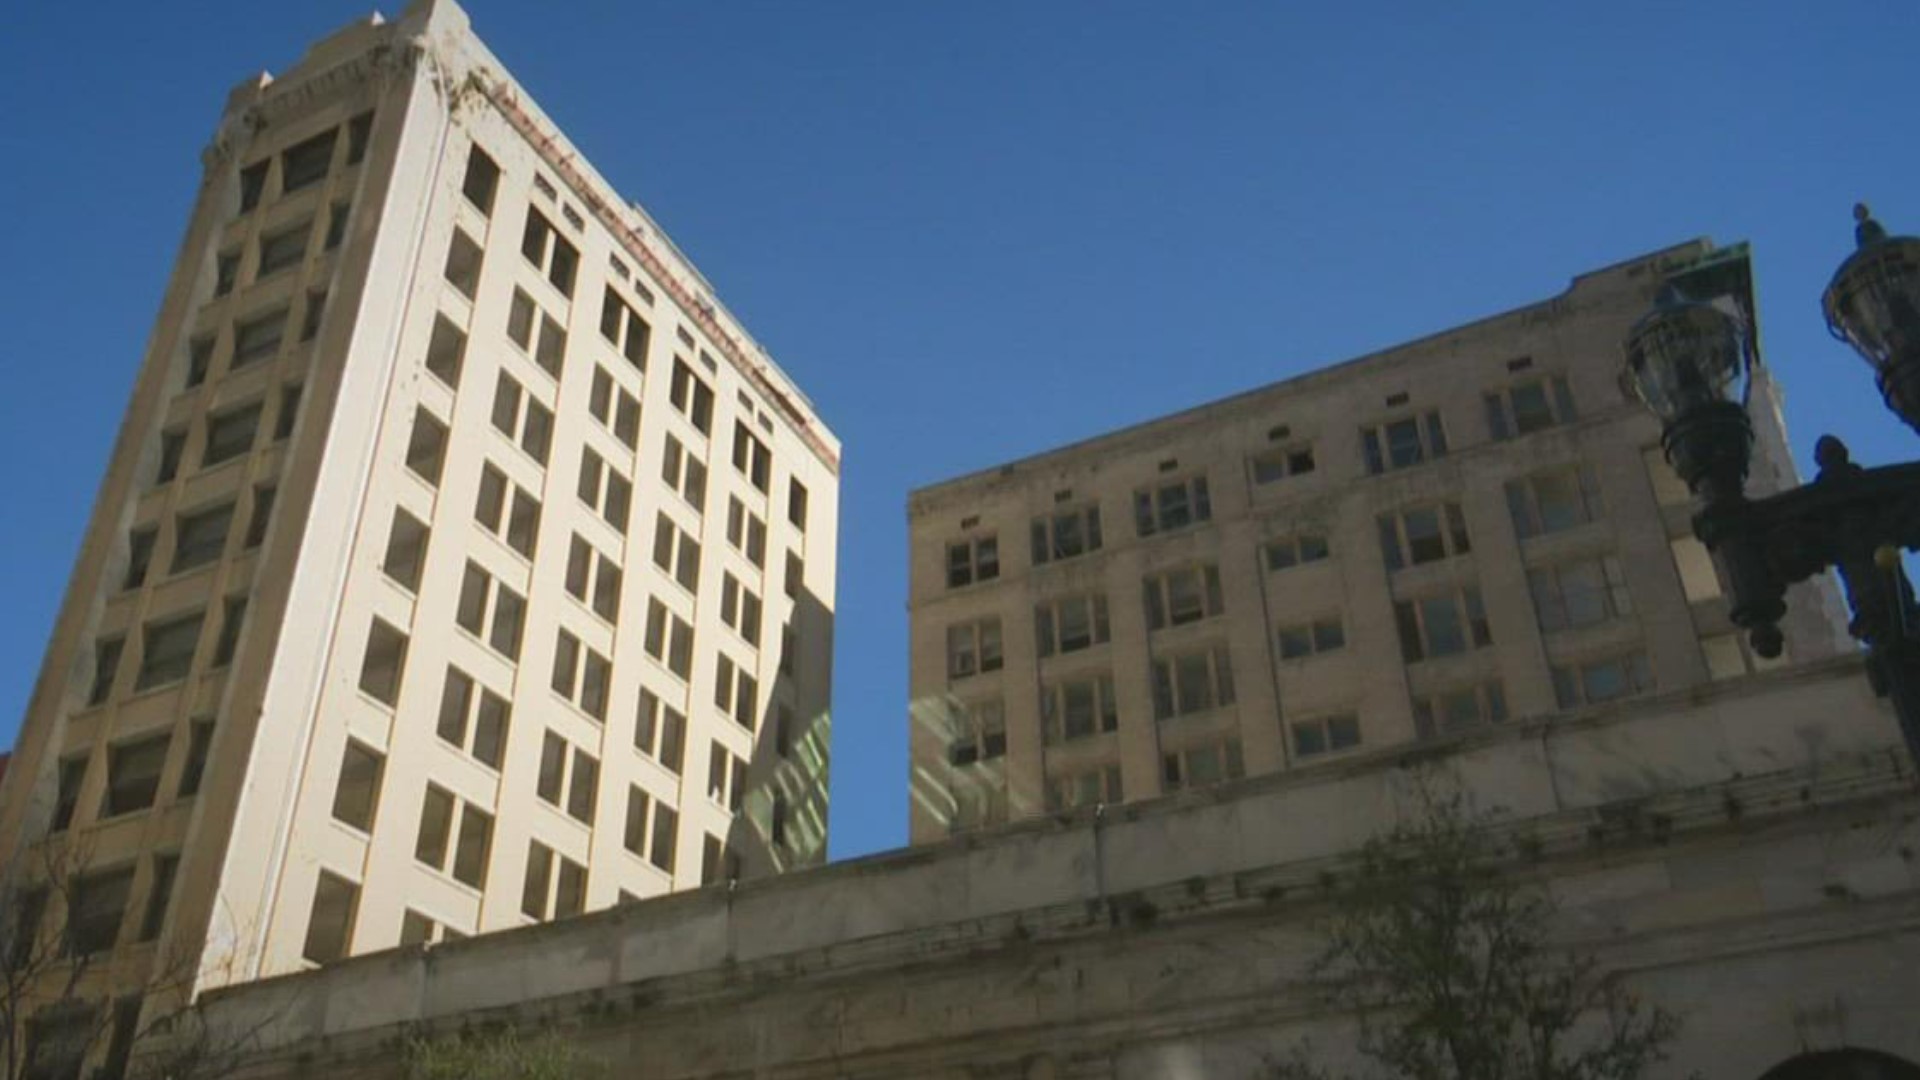 The incentives are by far the biggest taxpayer-backed package the city has put up for the three vacant buildings.